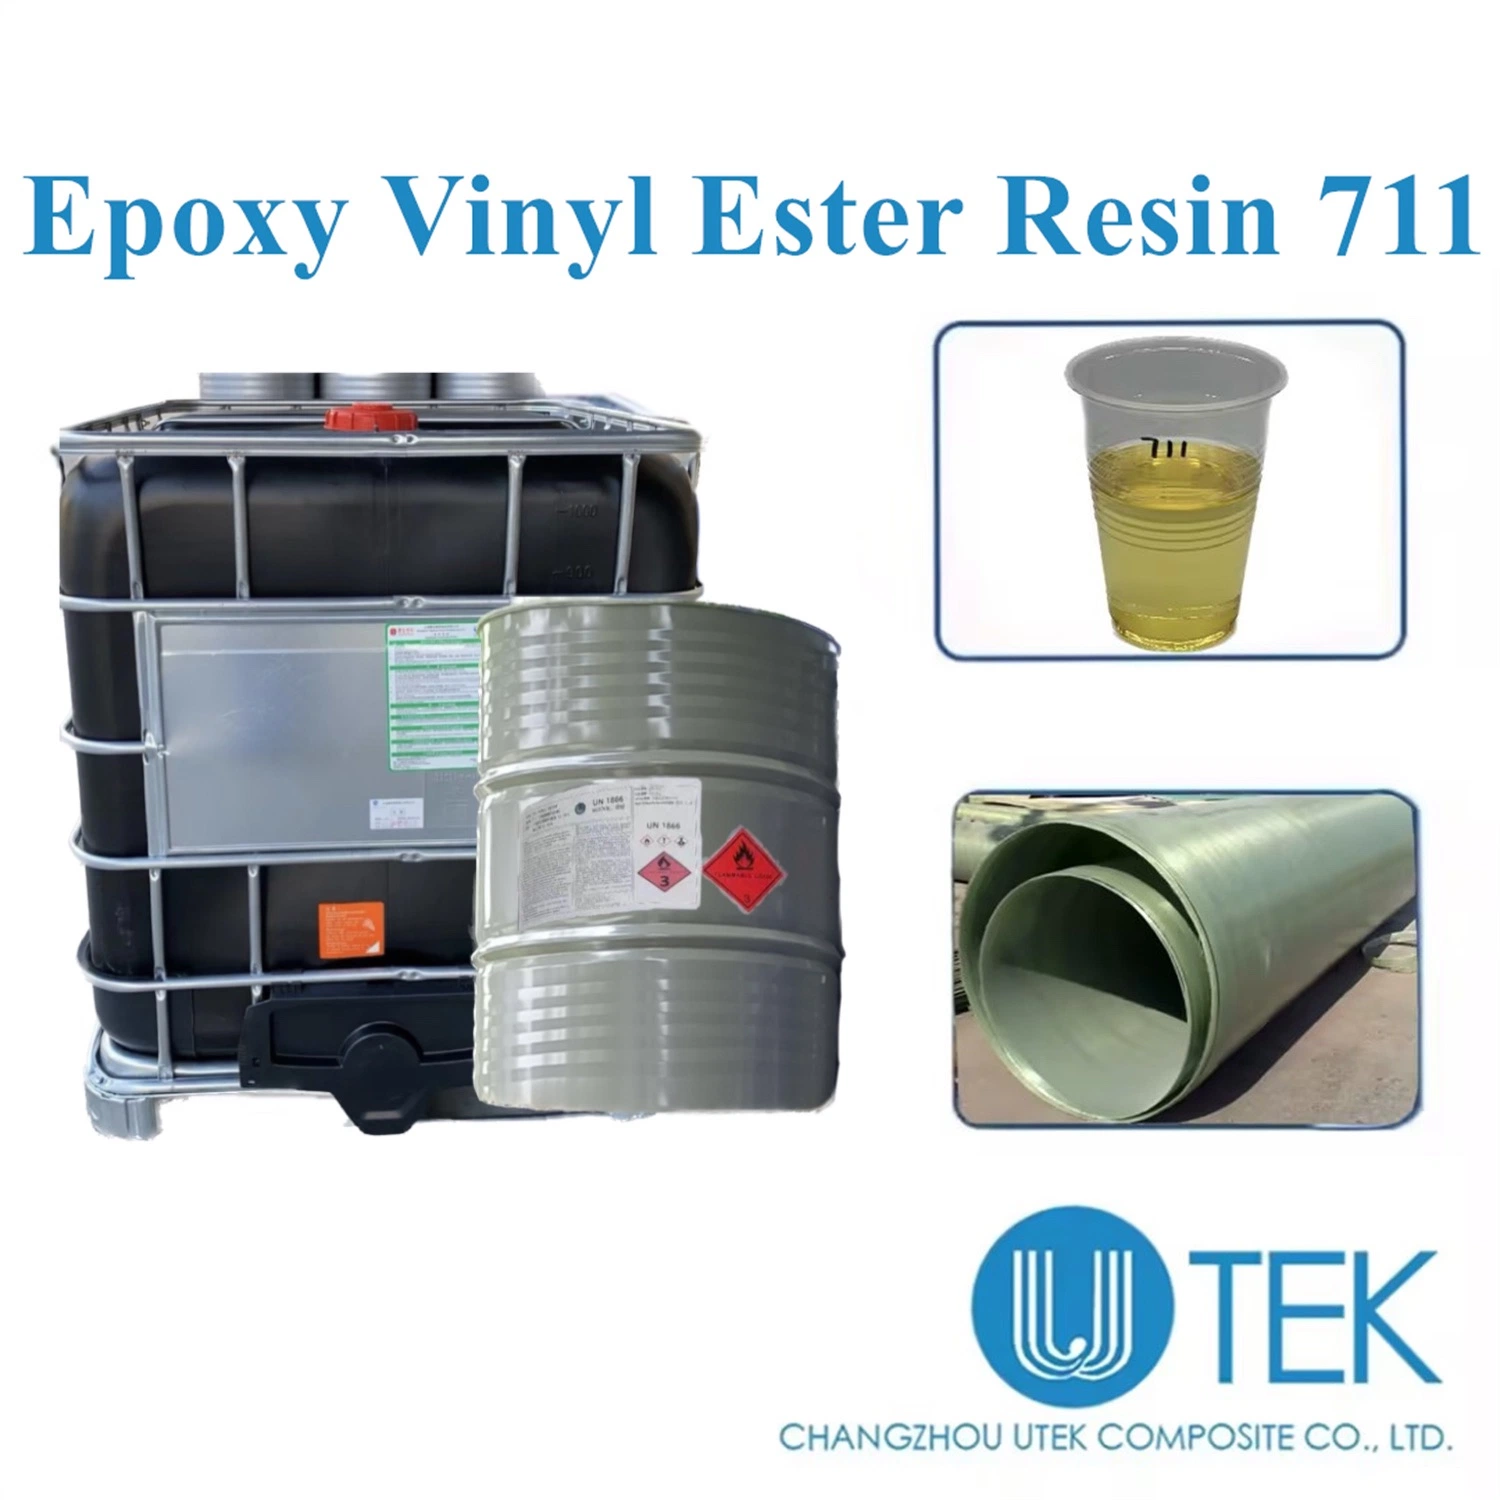 Bisphenol-a Type Epoxy Vinyl Ester Resin 711 for Chemical Processing Industry Applications